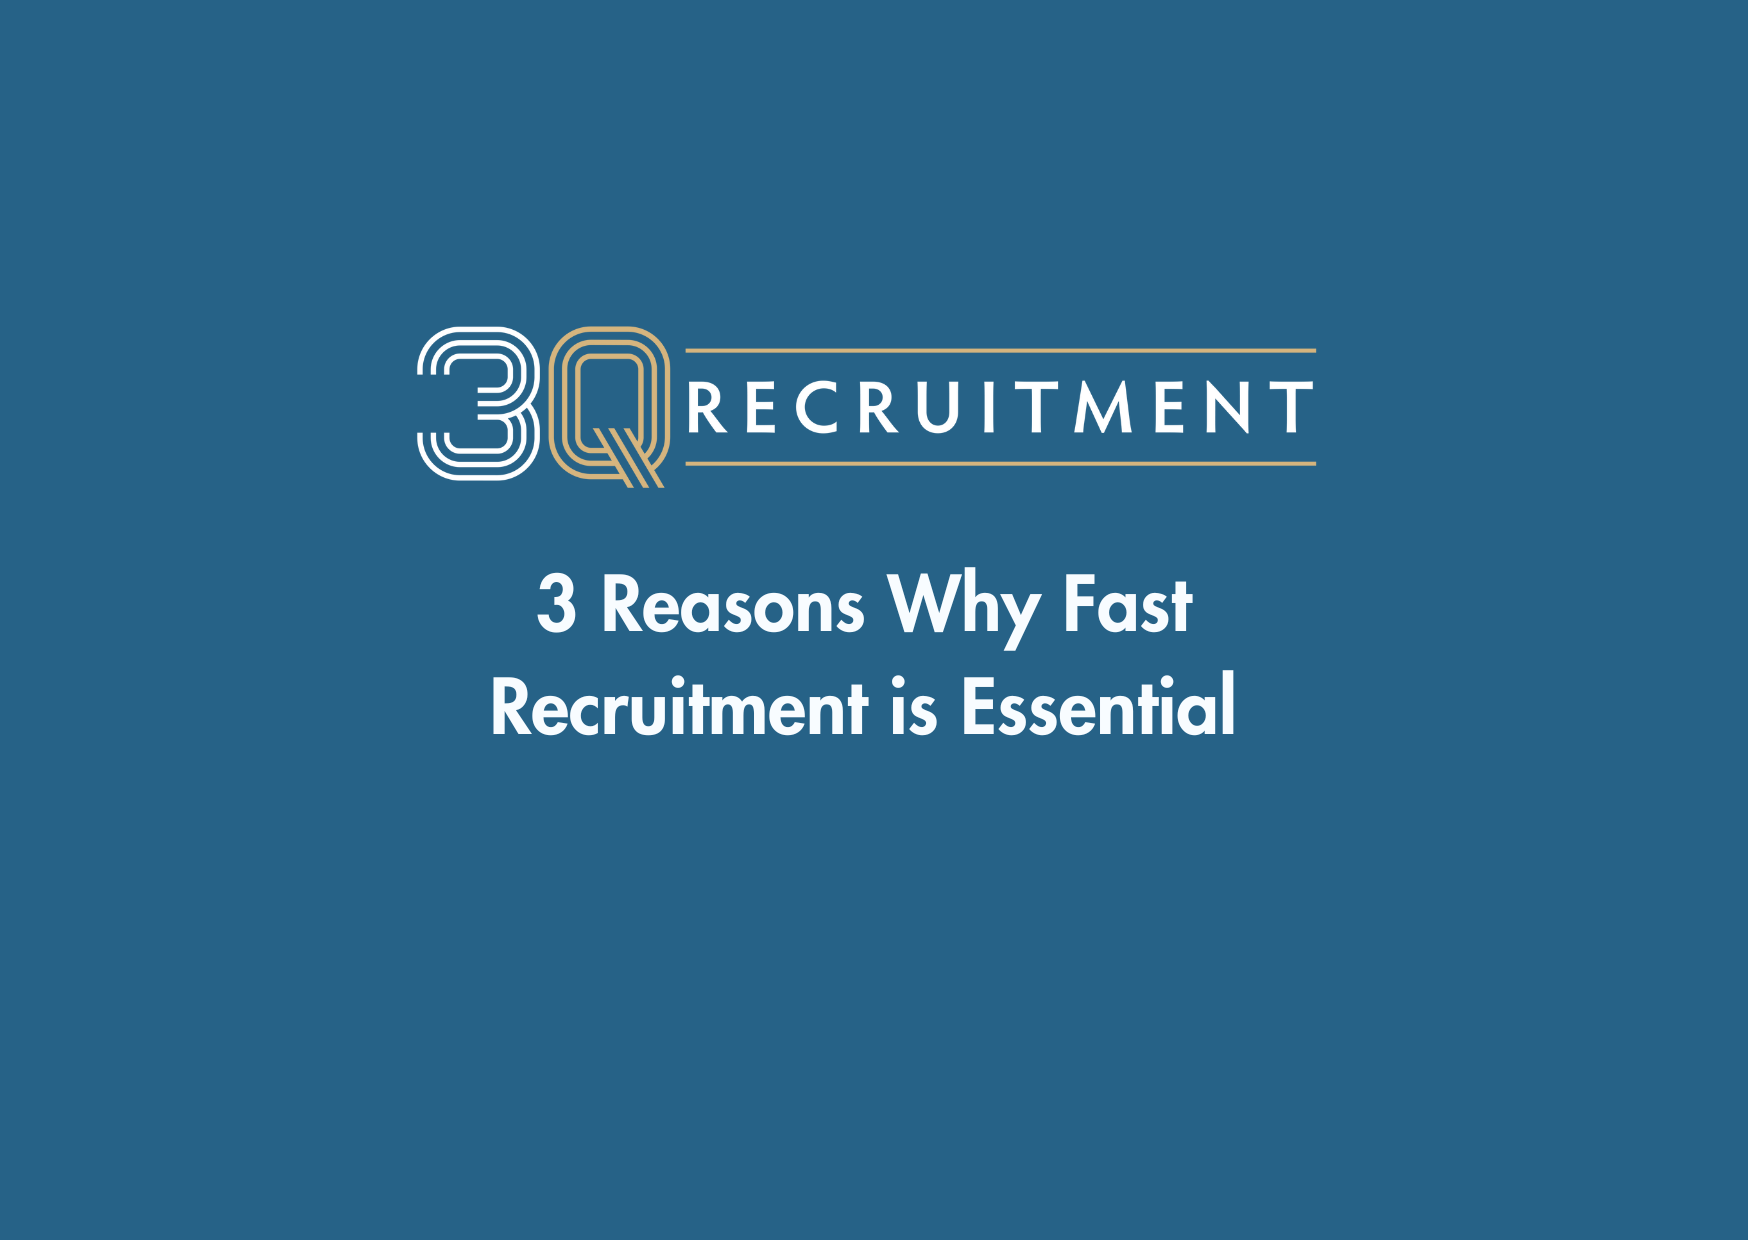 3Q Recruitment 3 Reasons Why Fast Recruitment is Essential